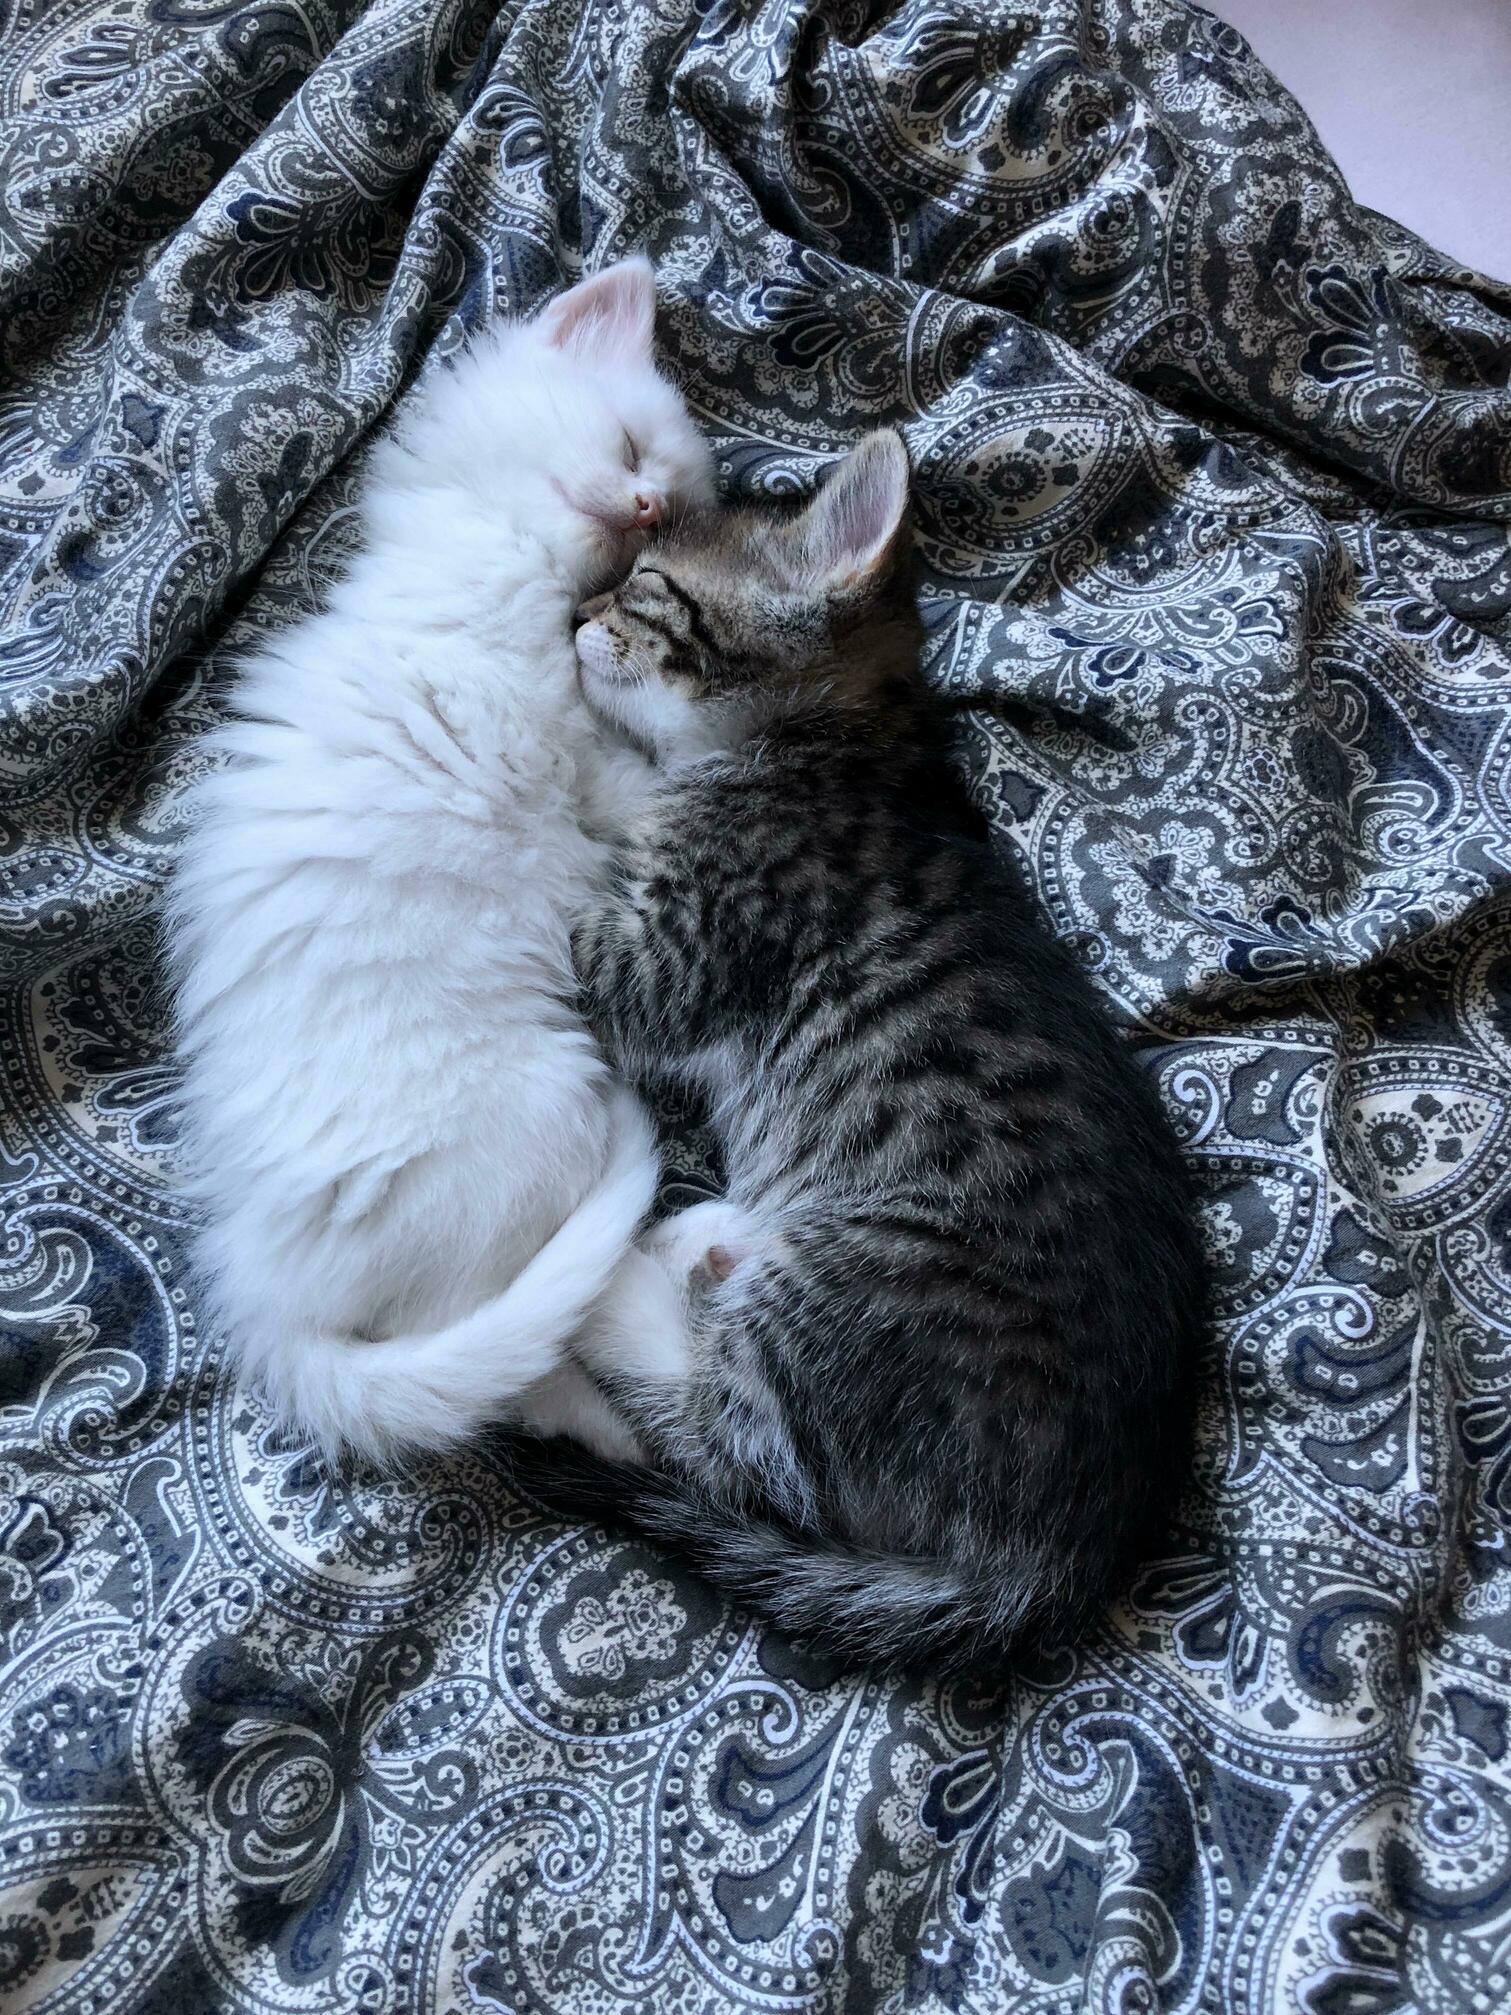 Floof and guac having a lil cuddle sesh